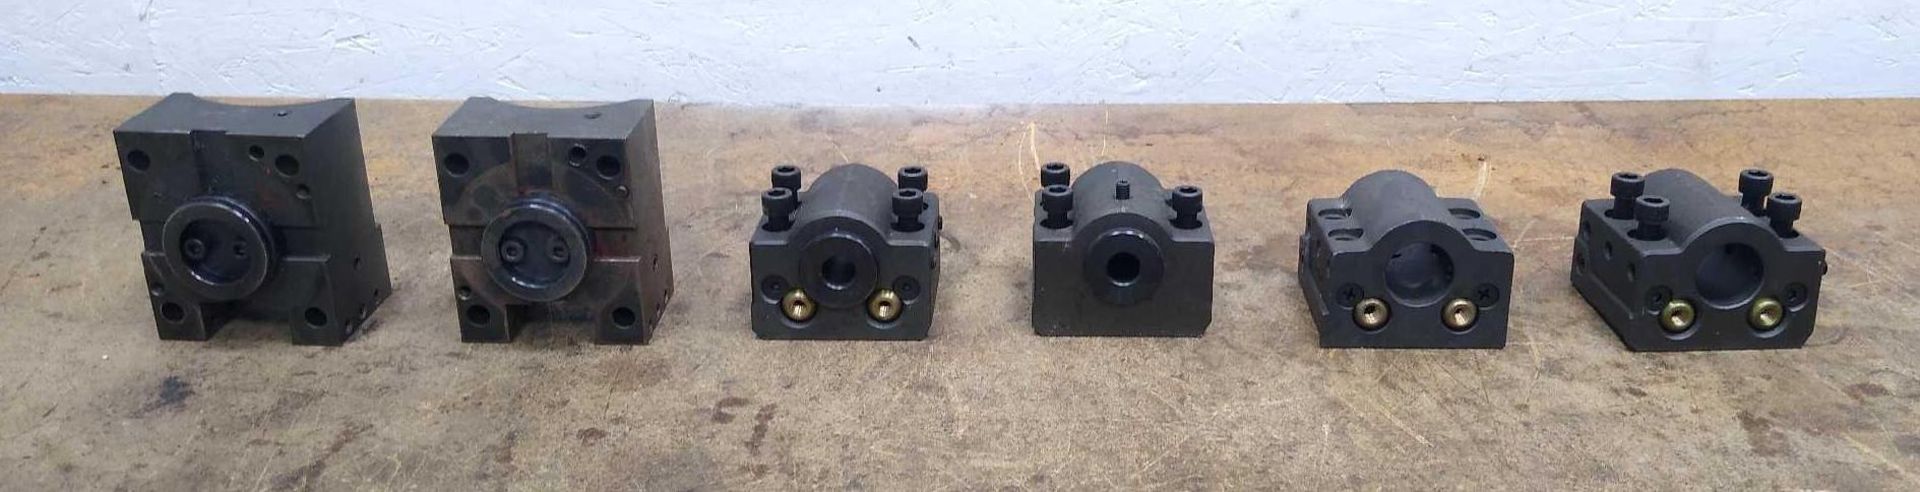 Assorted Turret Tooling for CNC Lathe